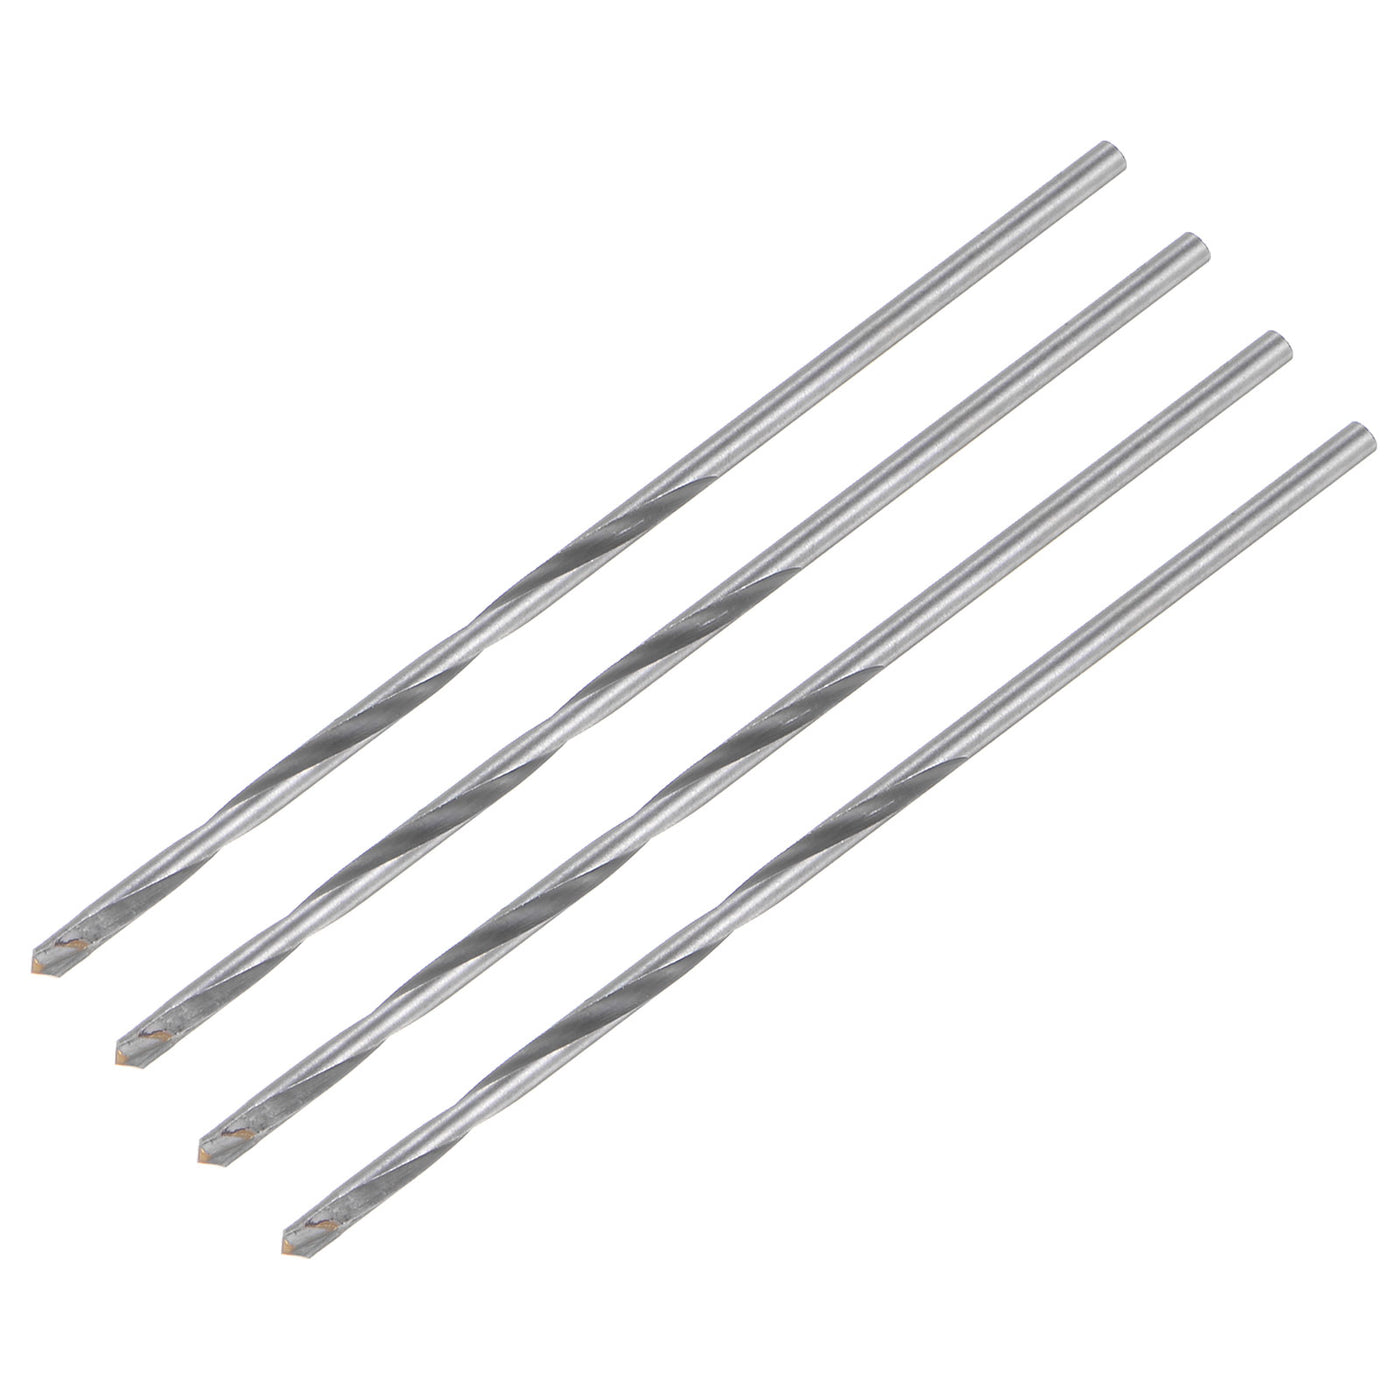 uxcell Uxcell 3mm Cutting Dia Round Shank Cemented Carbide Twist Drill Bit, 100mm Length 4 Pcs